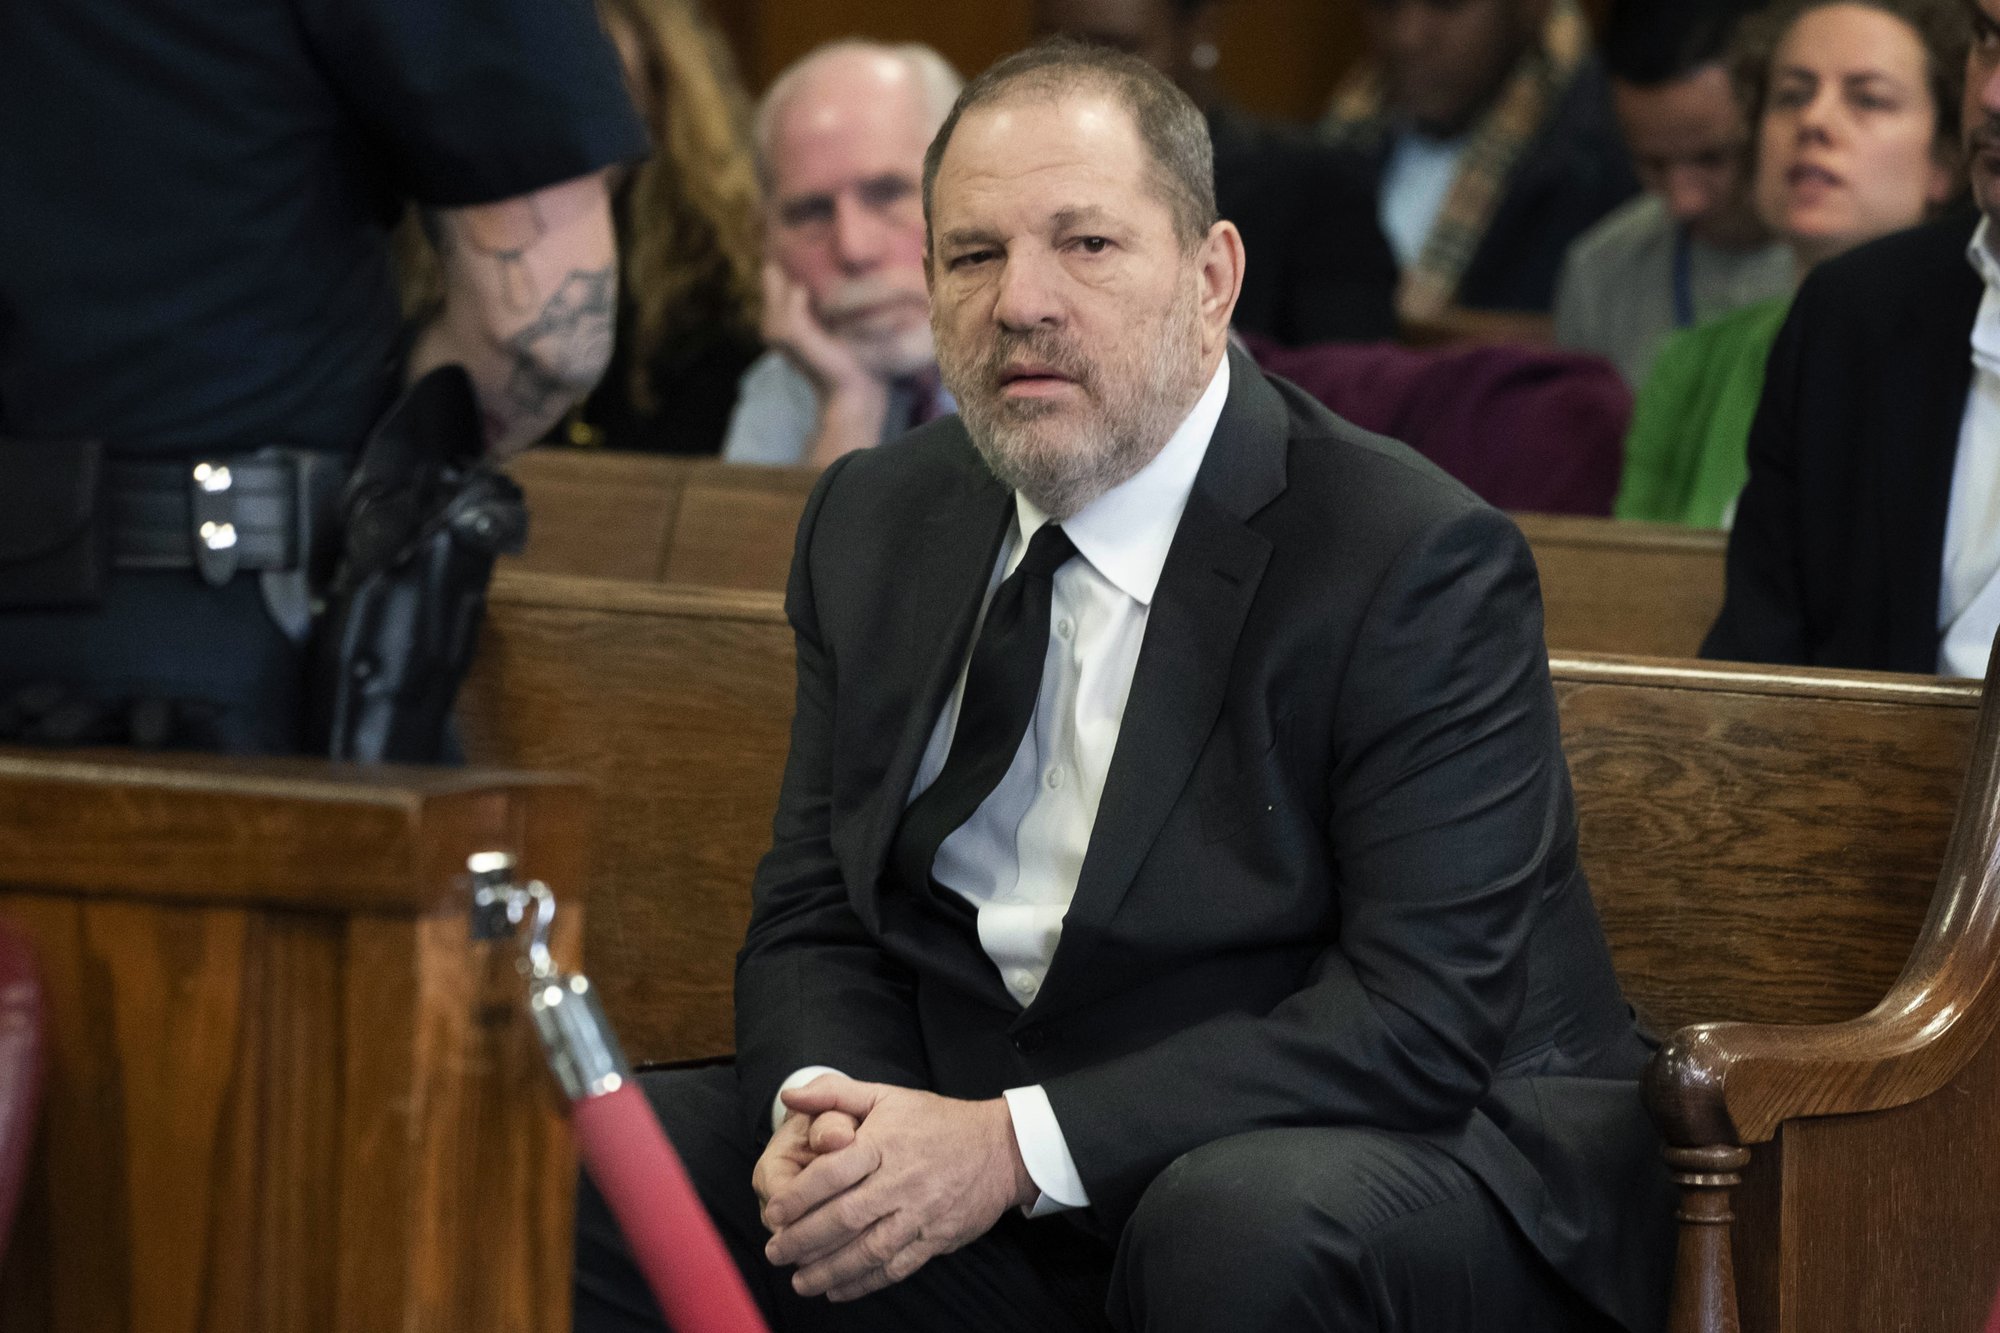 Judge approves changes to Weinstein’s legal team